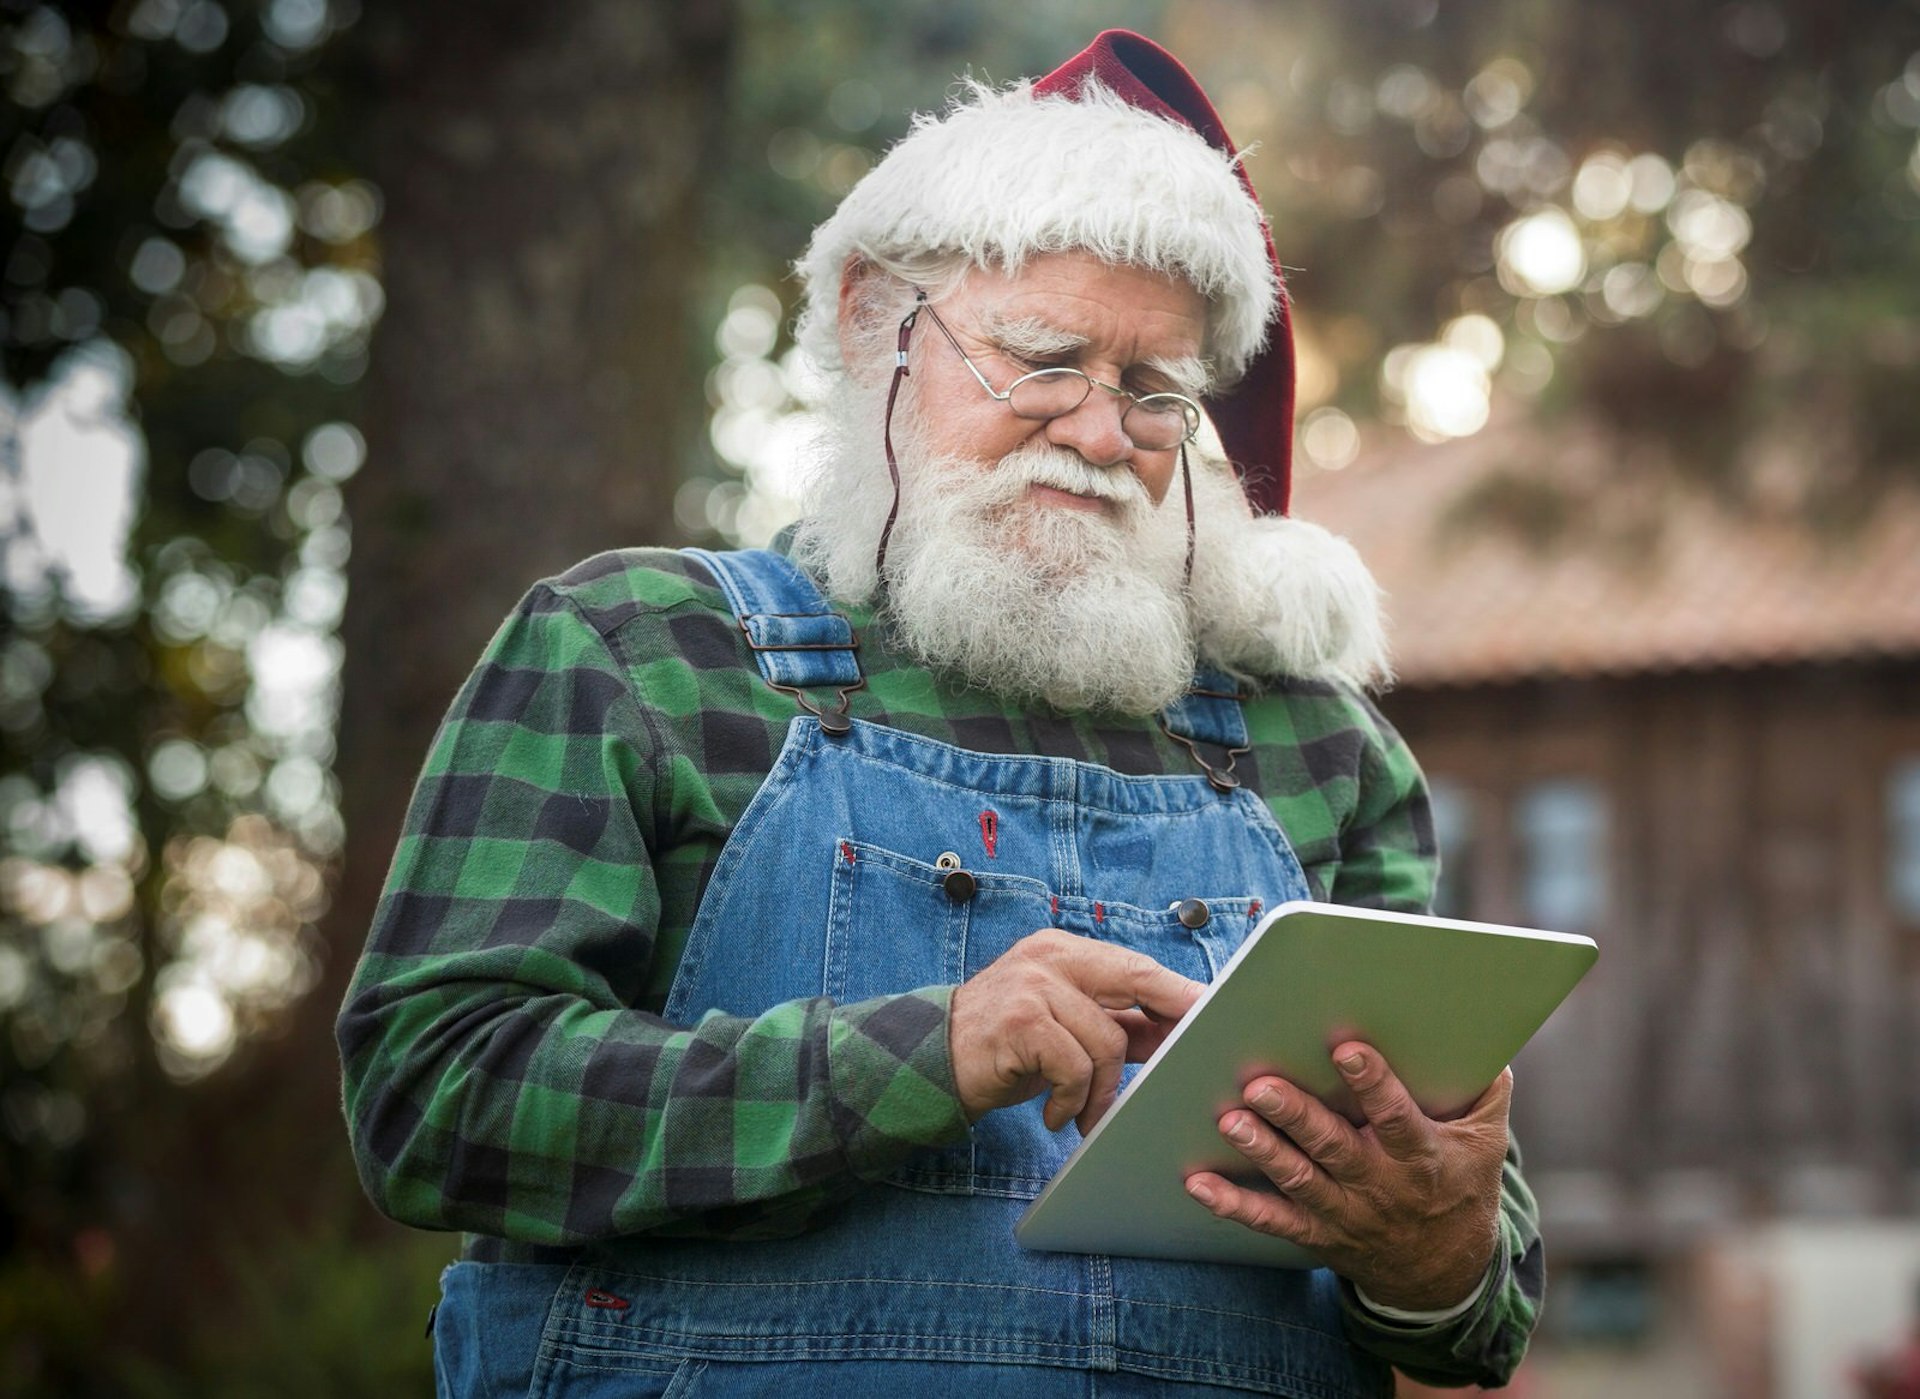 Santa Claus stands in a green check shirt and dungarees using a tablet computer 